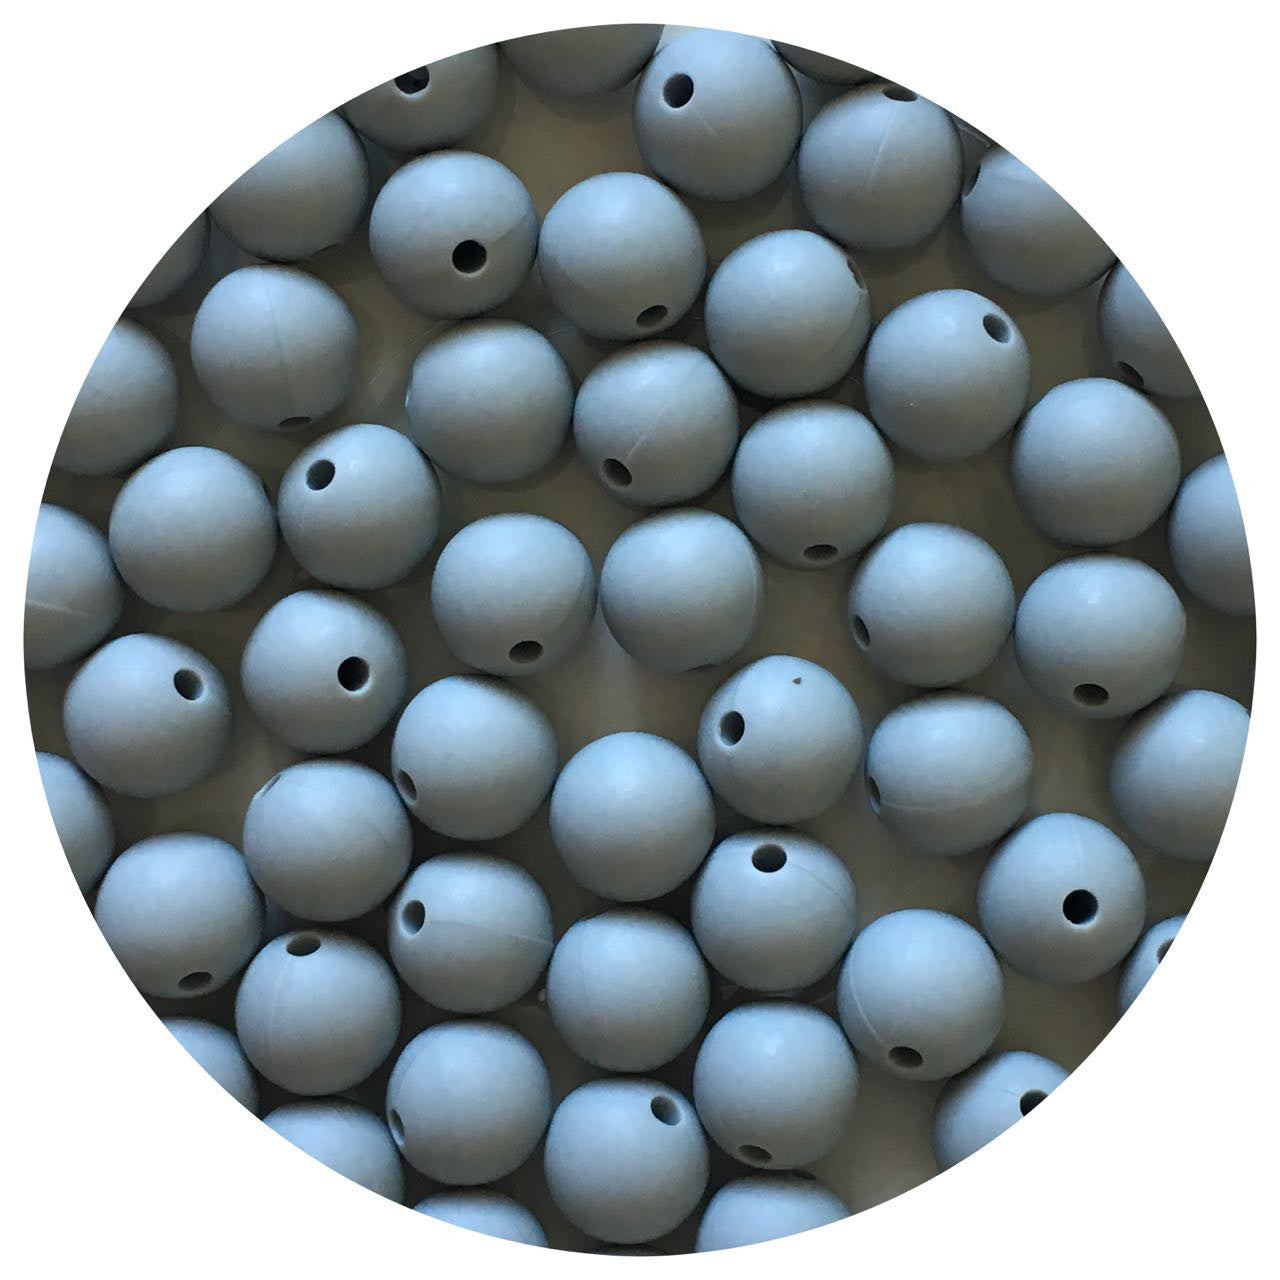 Light Grey - 12mm Round Silicone Beads - 10 beads